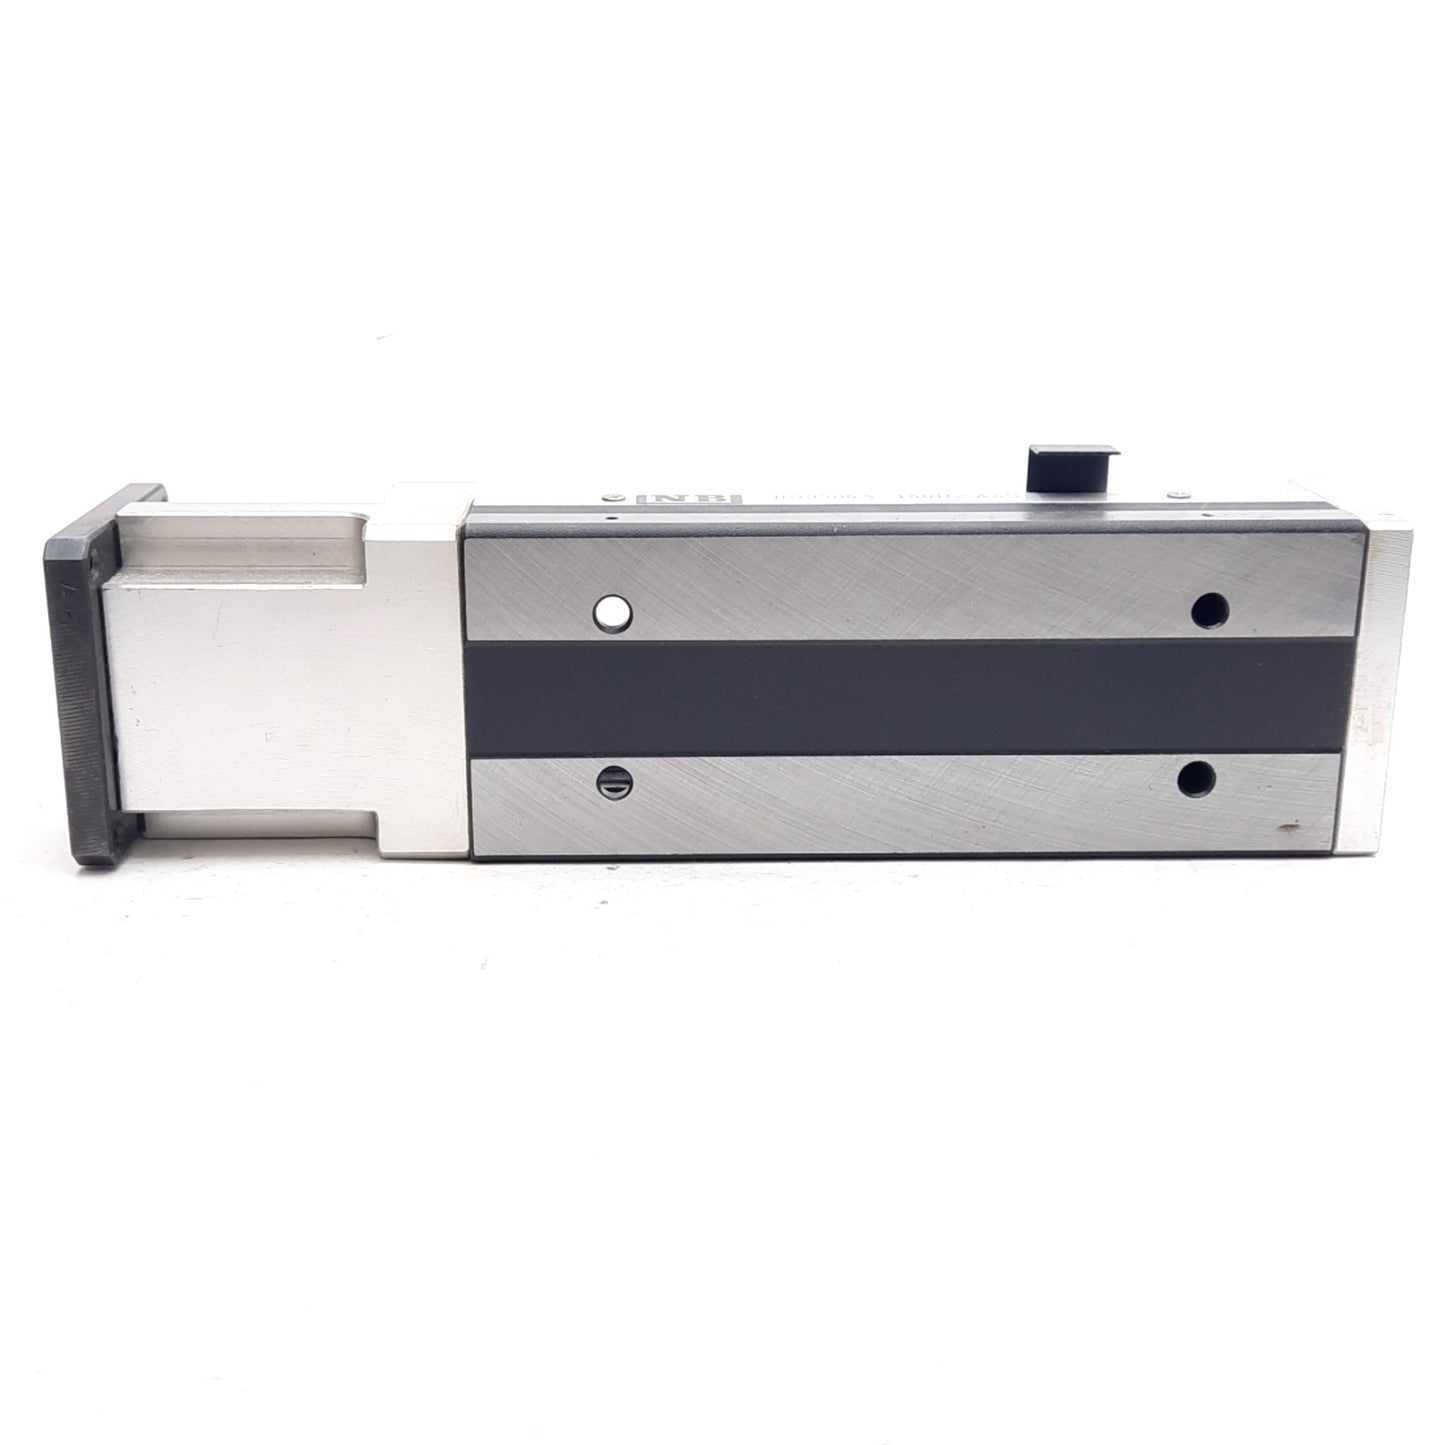 Used NB BG3305A-150H/A5S Linear Actuator, Travel: 60mm, Shaft Diameter: 9.5mm 3/8"